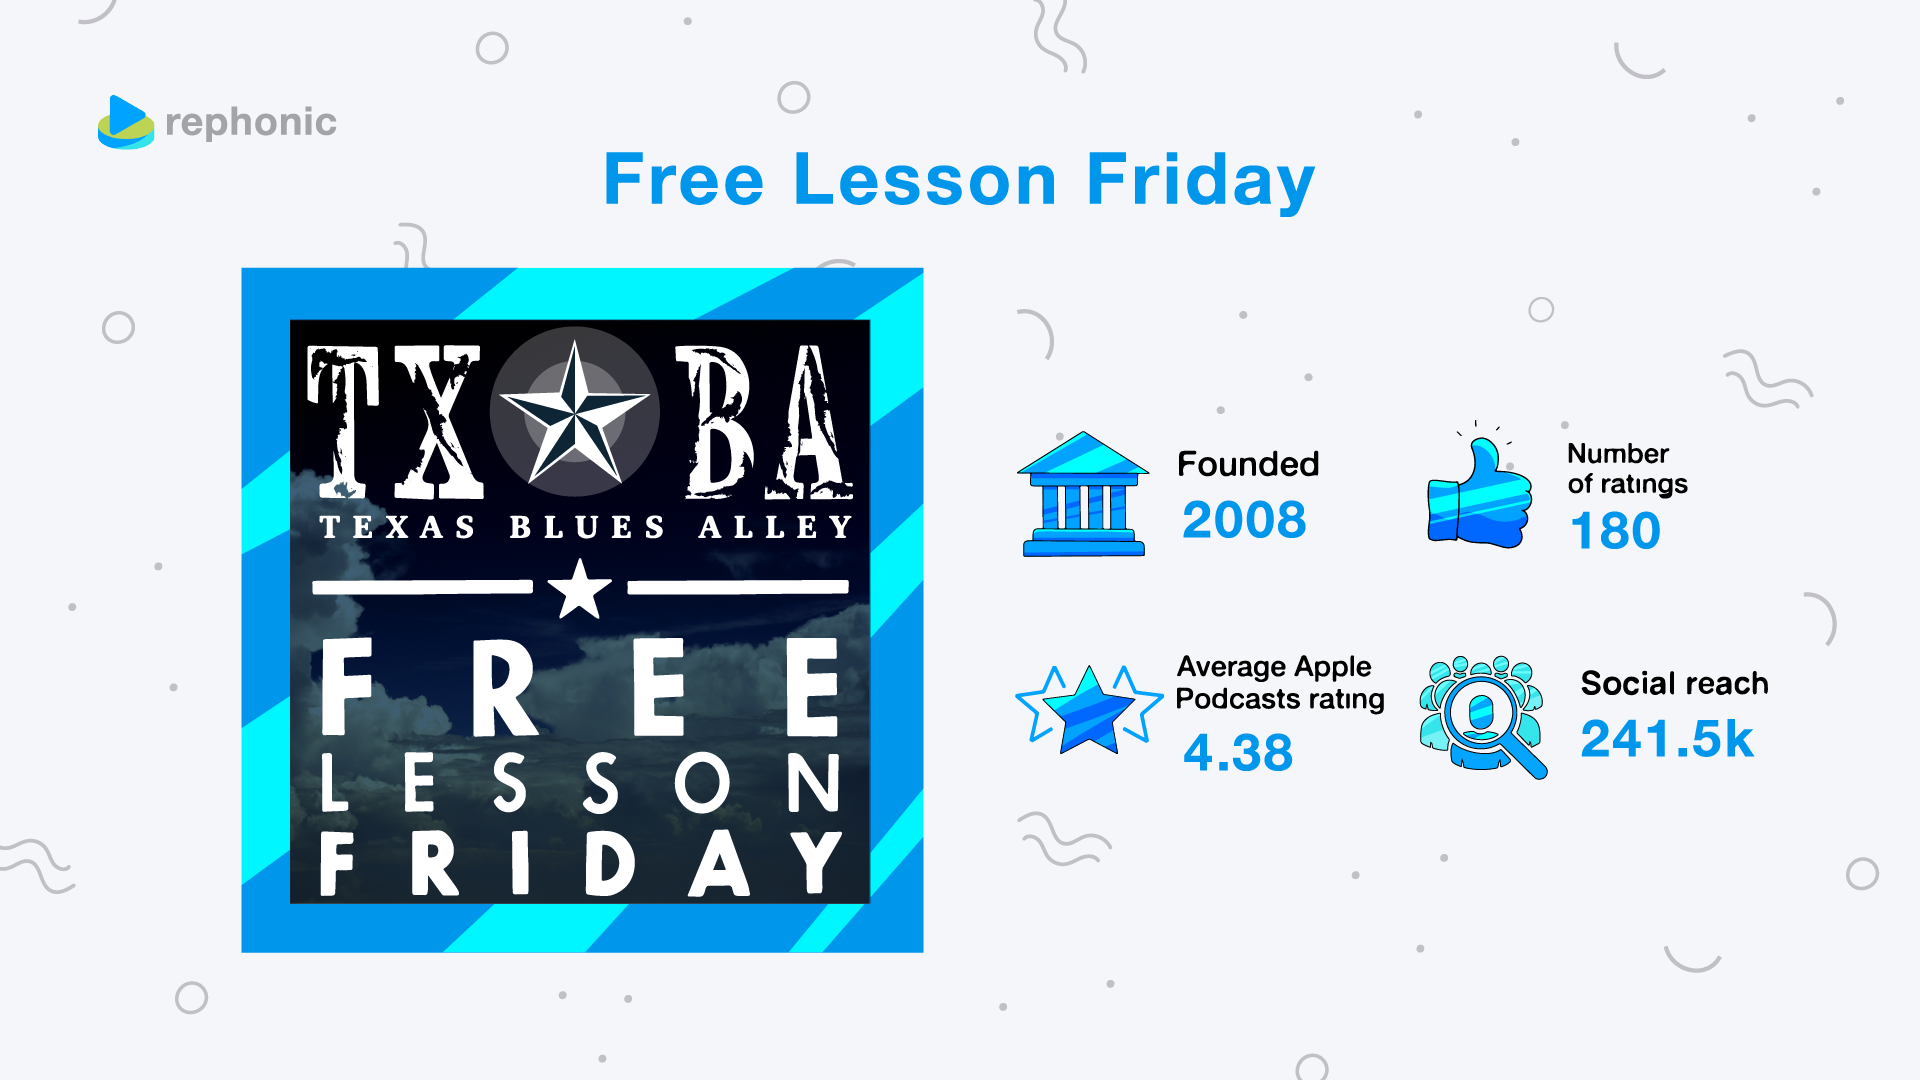 Free Lesson Friday podcast stats on Rephonic